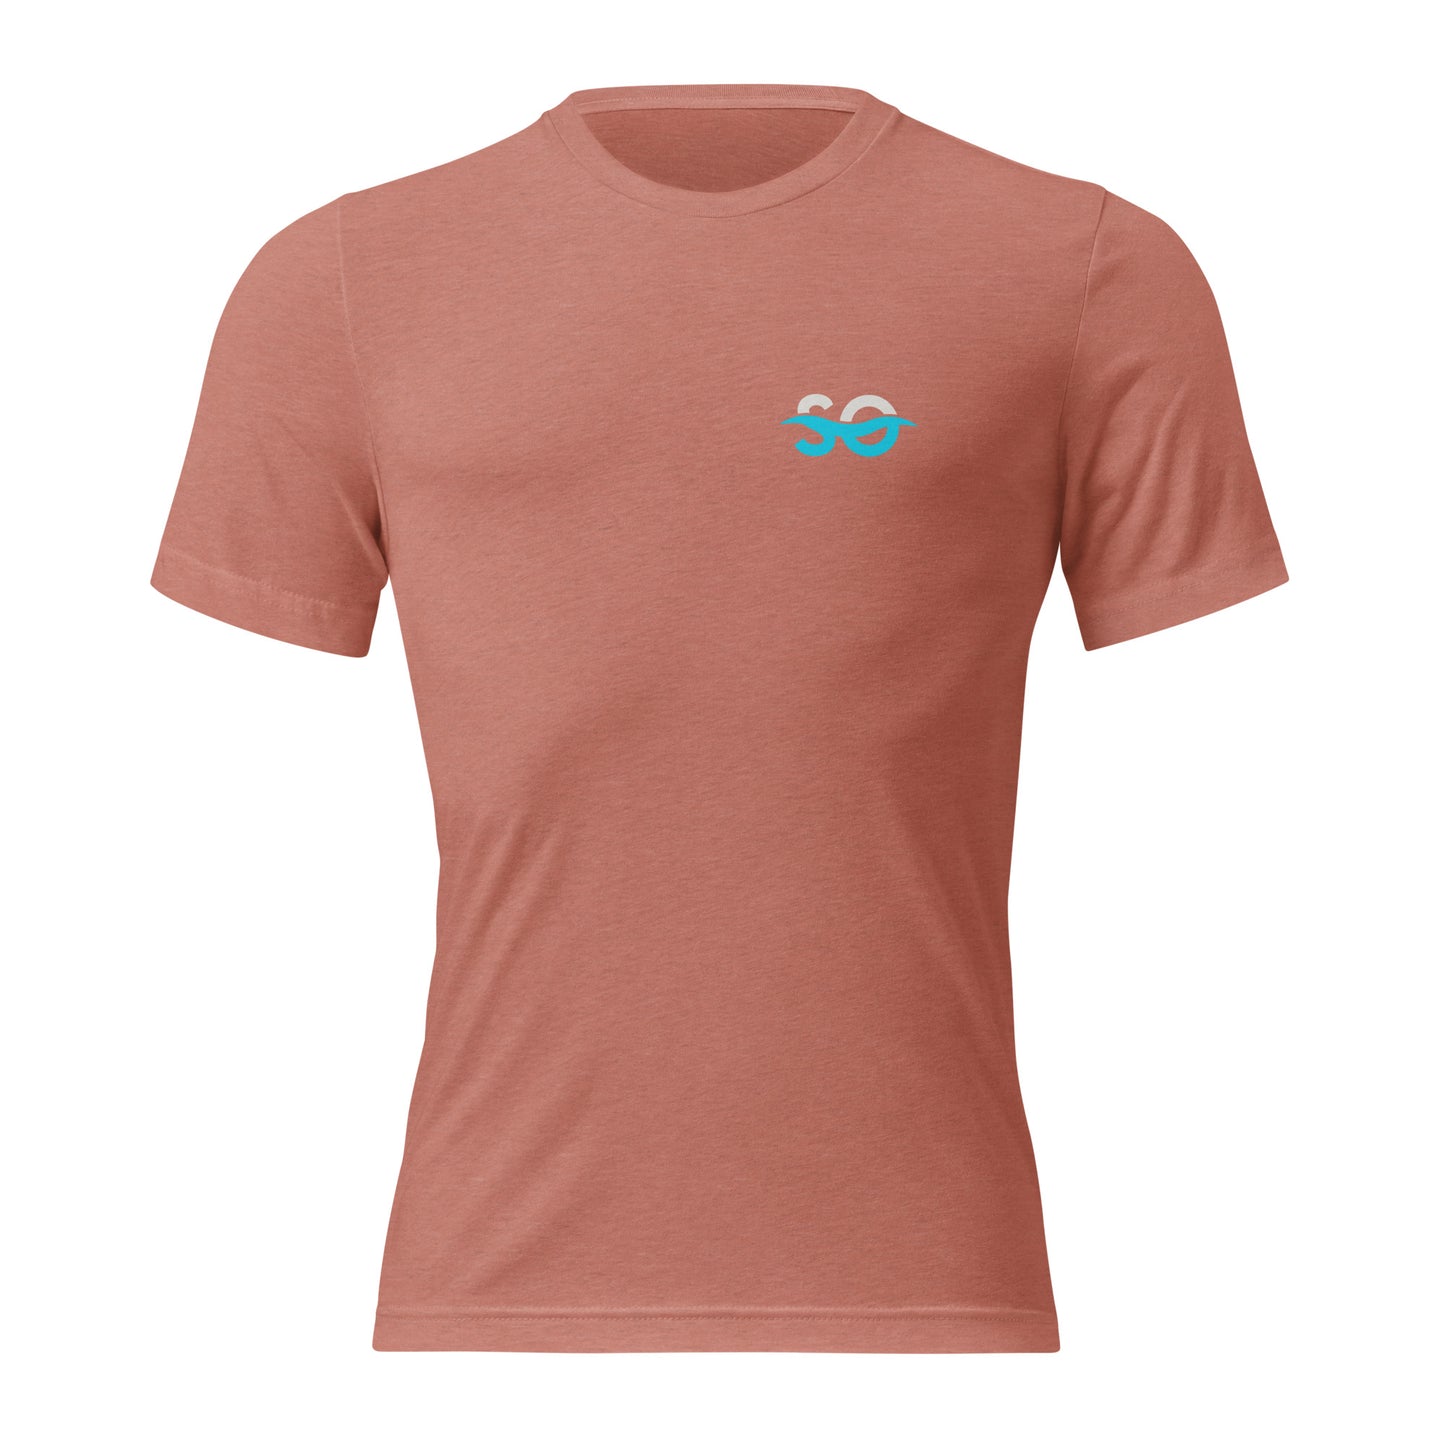 a women's t - shirt with a blue logo on the chest